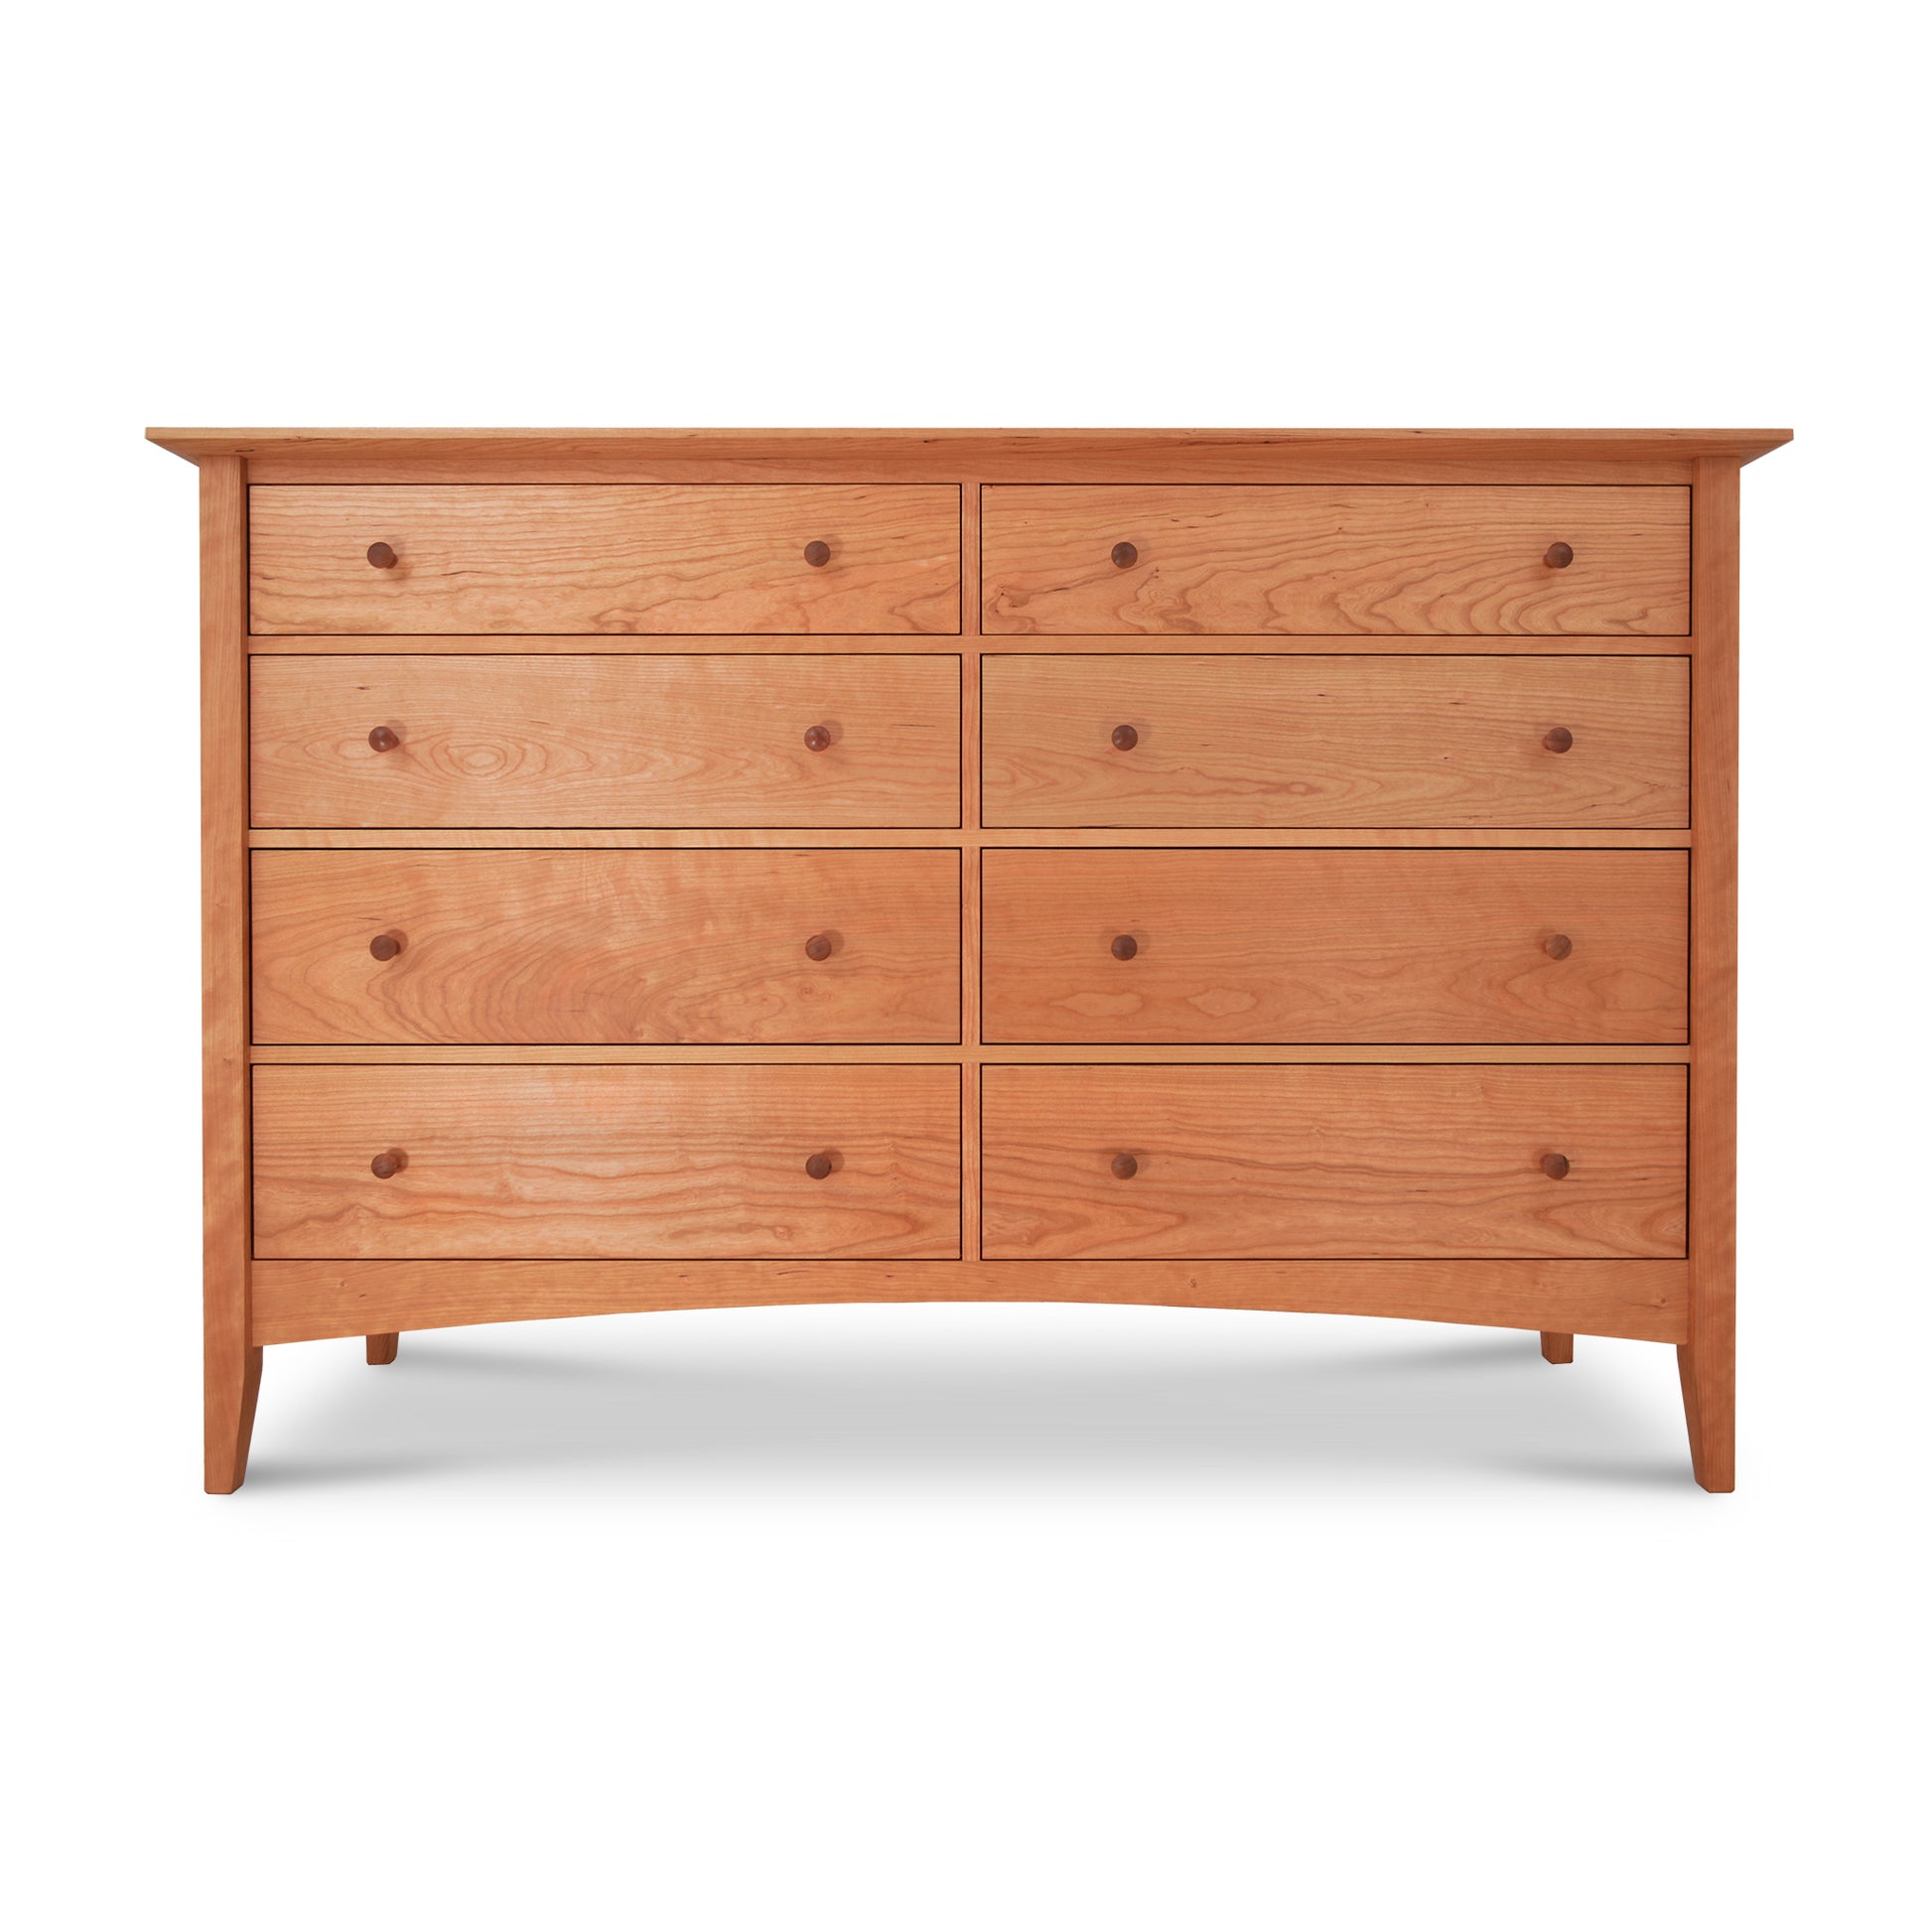 A Maple Corner Woodworks American Shaker 8-Drawer Dresser made of solid hardwoods on a white background.